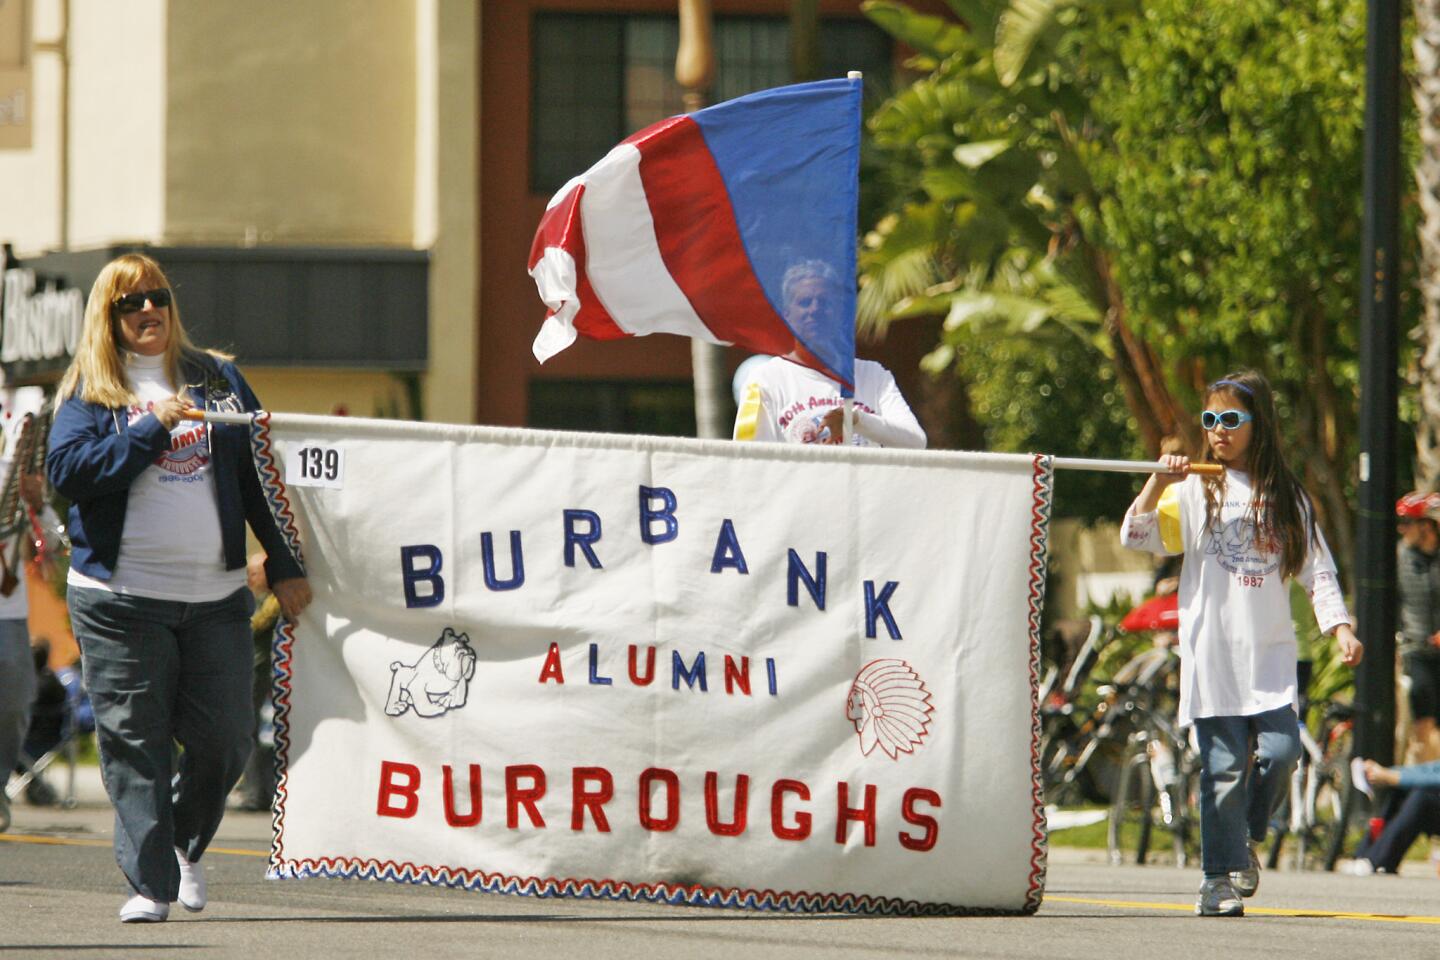 Sharon Stockman, left, Fiona Okida, 9, right, and members of the Burbank and Burroughs Alumni participate in Burbank on Parade, which took place on Olive Ave. between Keystone St. and Lomita St. on Saturday, April 14, 2012.